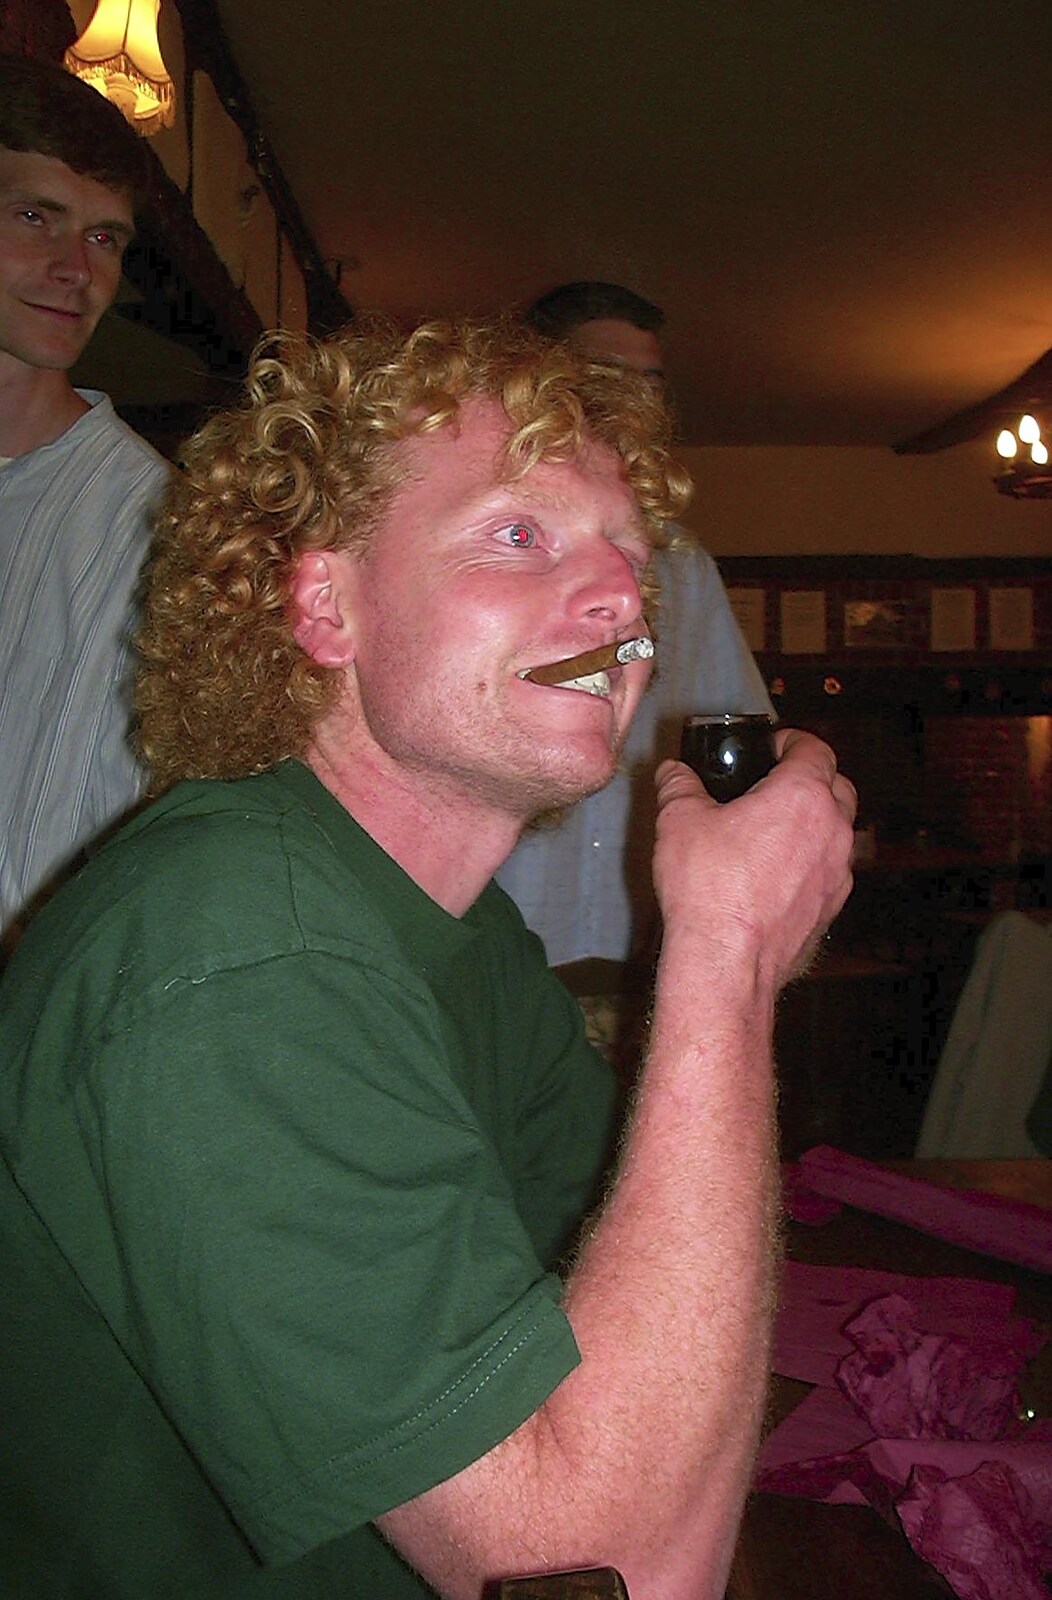 Wavy chomps on a cigar like a US Army general from Paul's Stag Night, Brome, Scole and Bressingham - Friday 20th August 2004